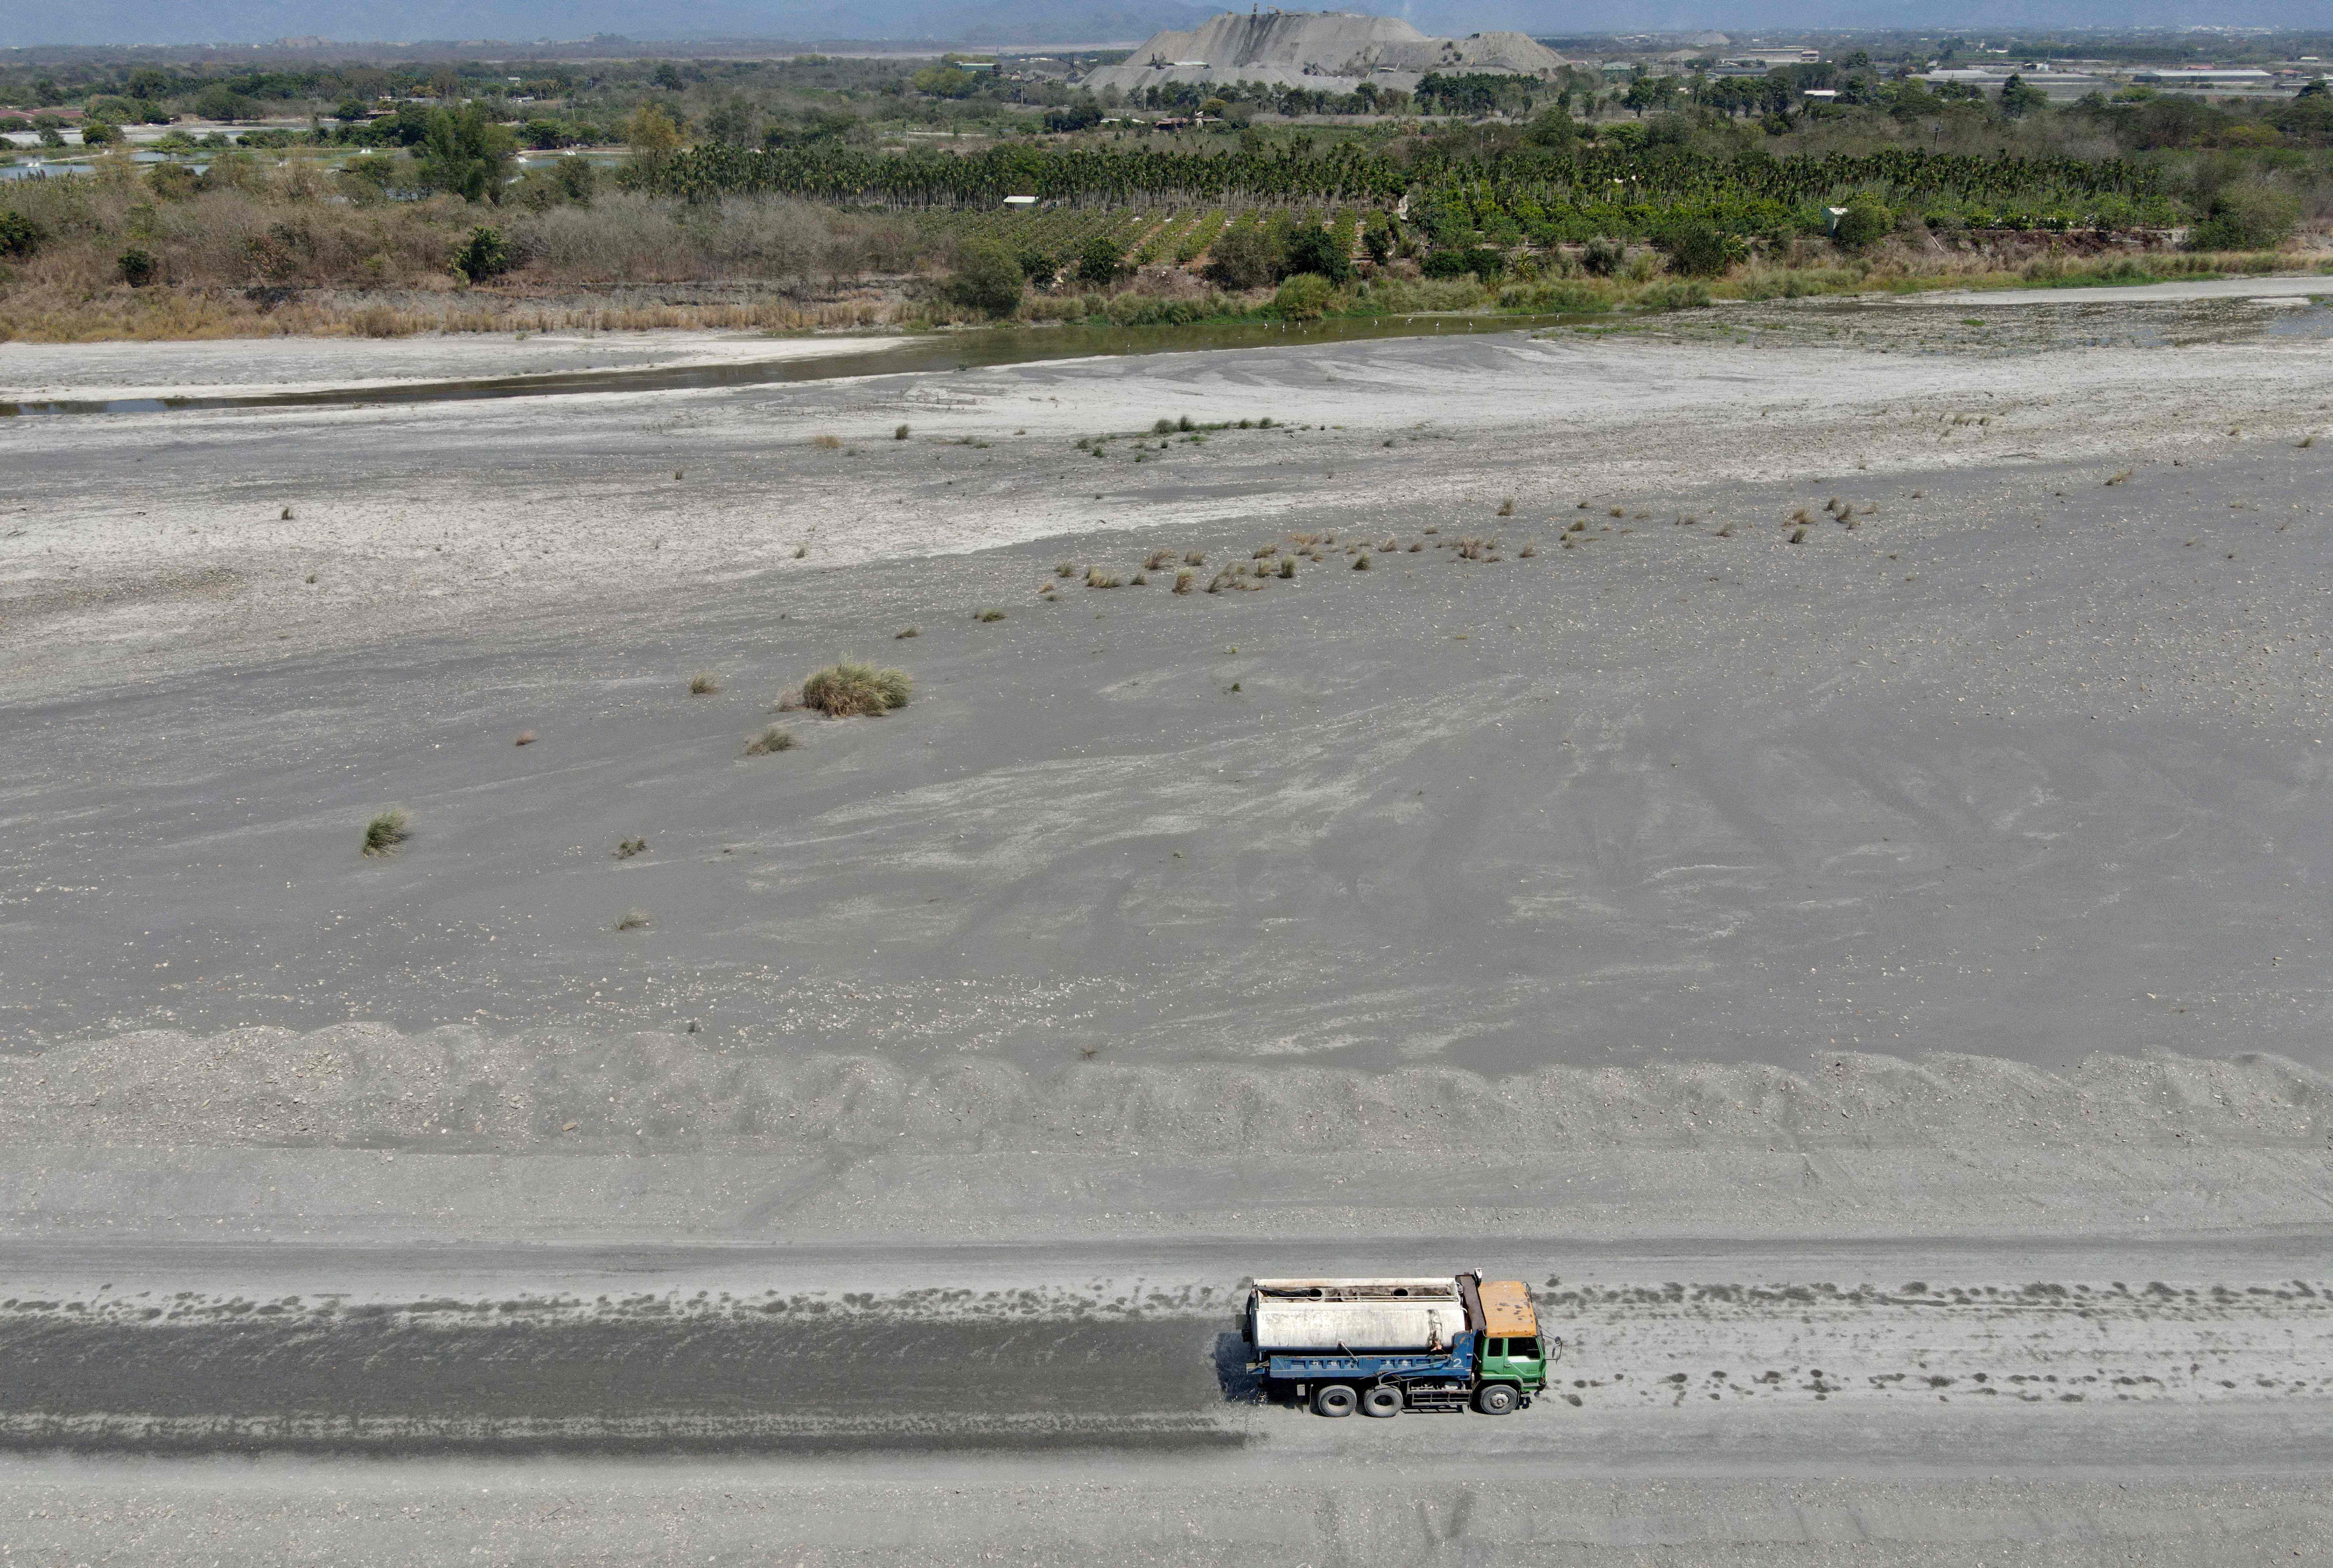 This aerial photo shows a truck riding along the empty Ai Liao river bed in Pingtung county, southern Taiwan.